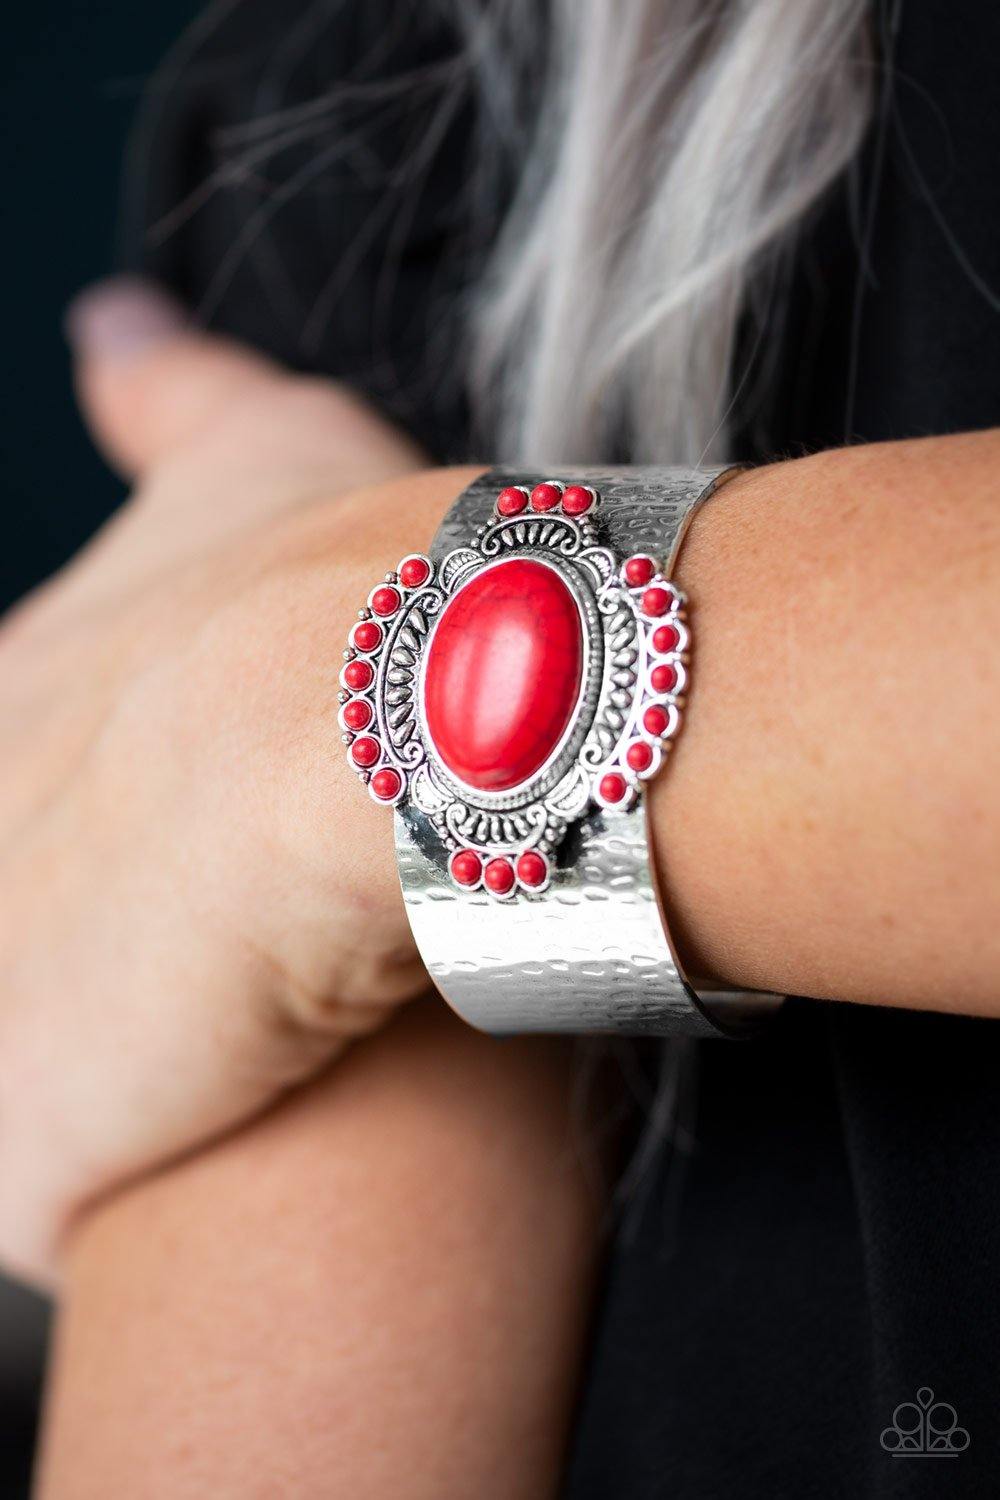 Canyon Crafted Red Bracelet - Nothin' But Jewelry by Mz. Netta